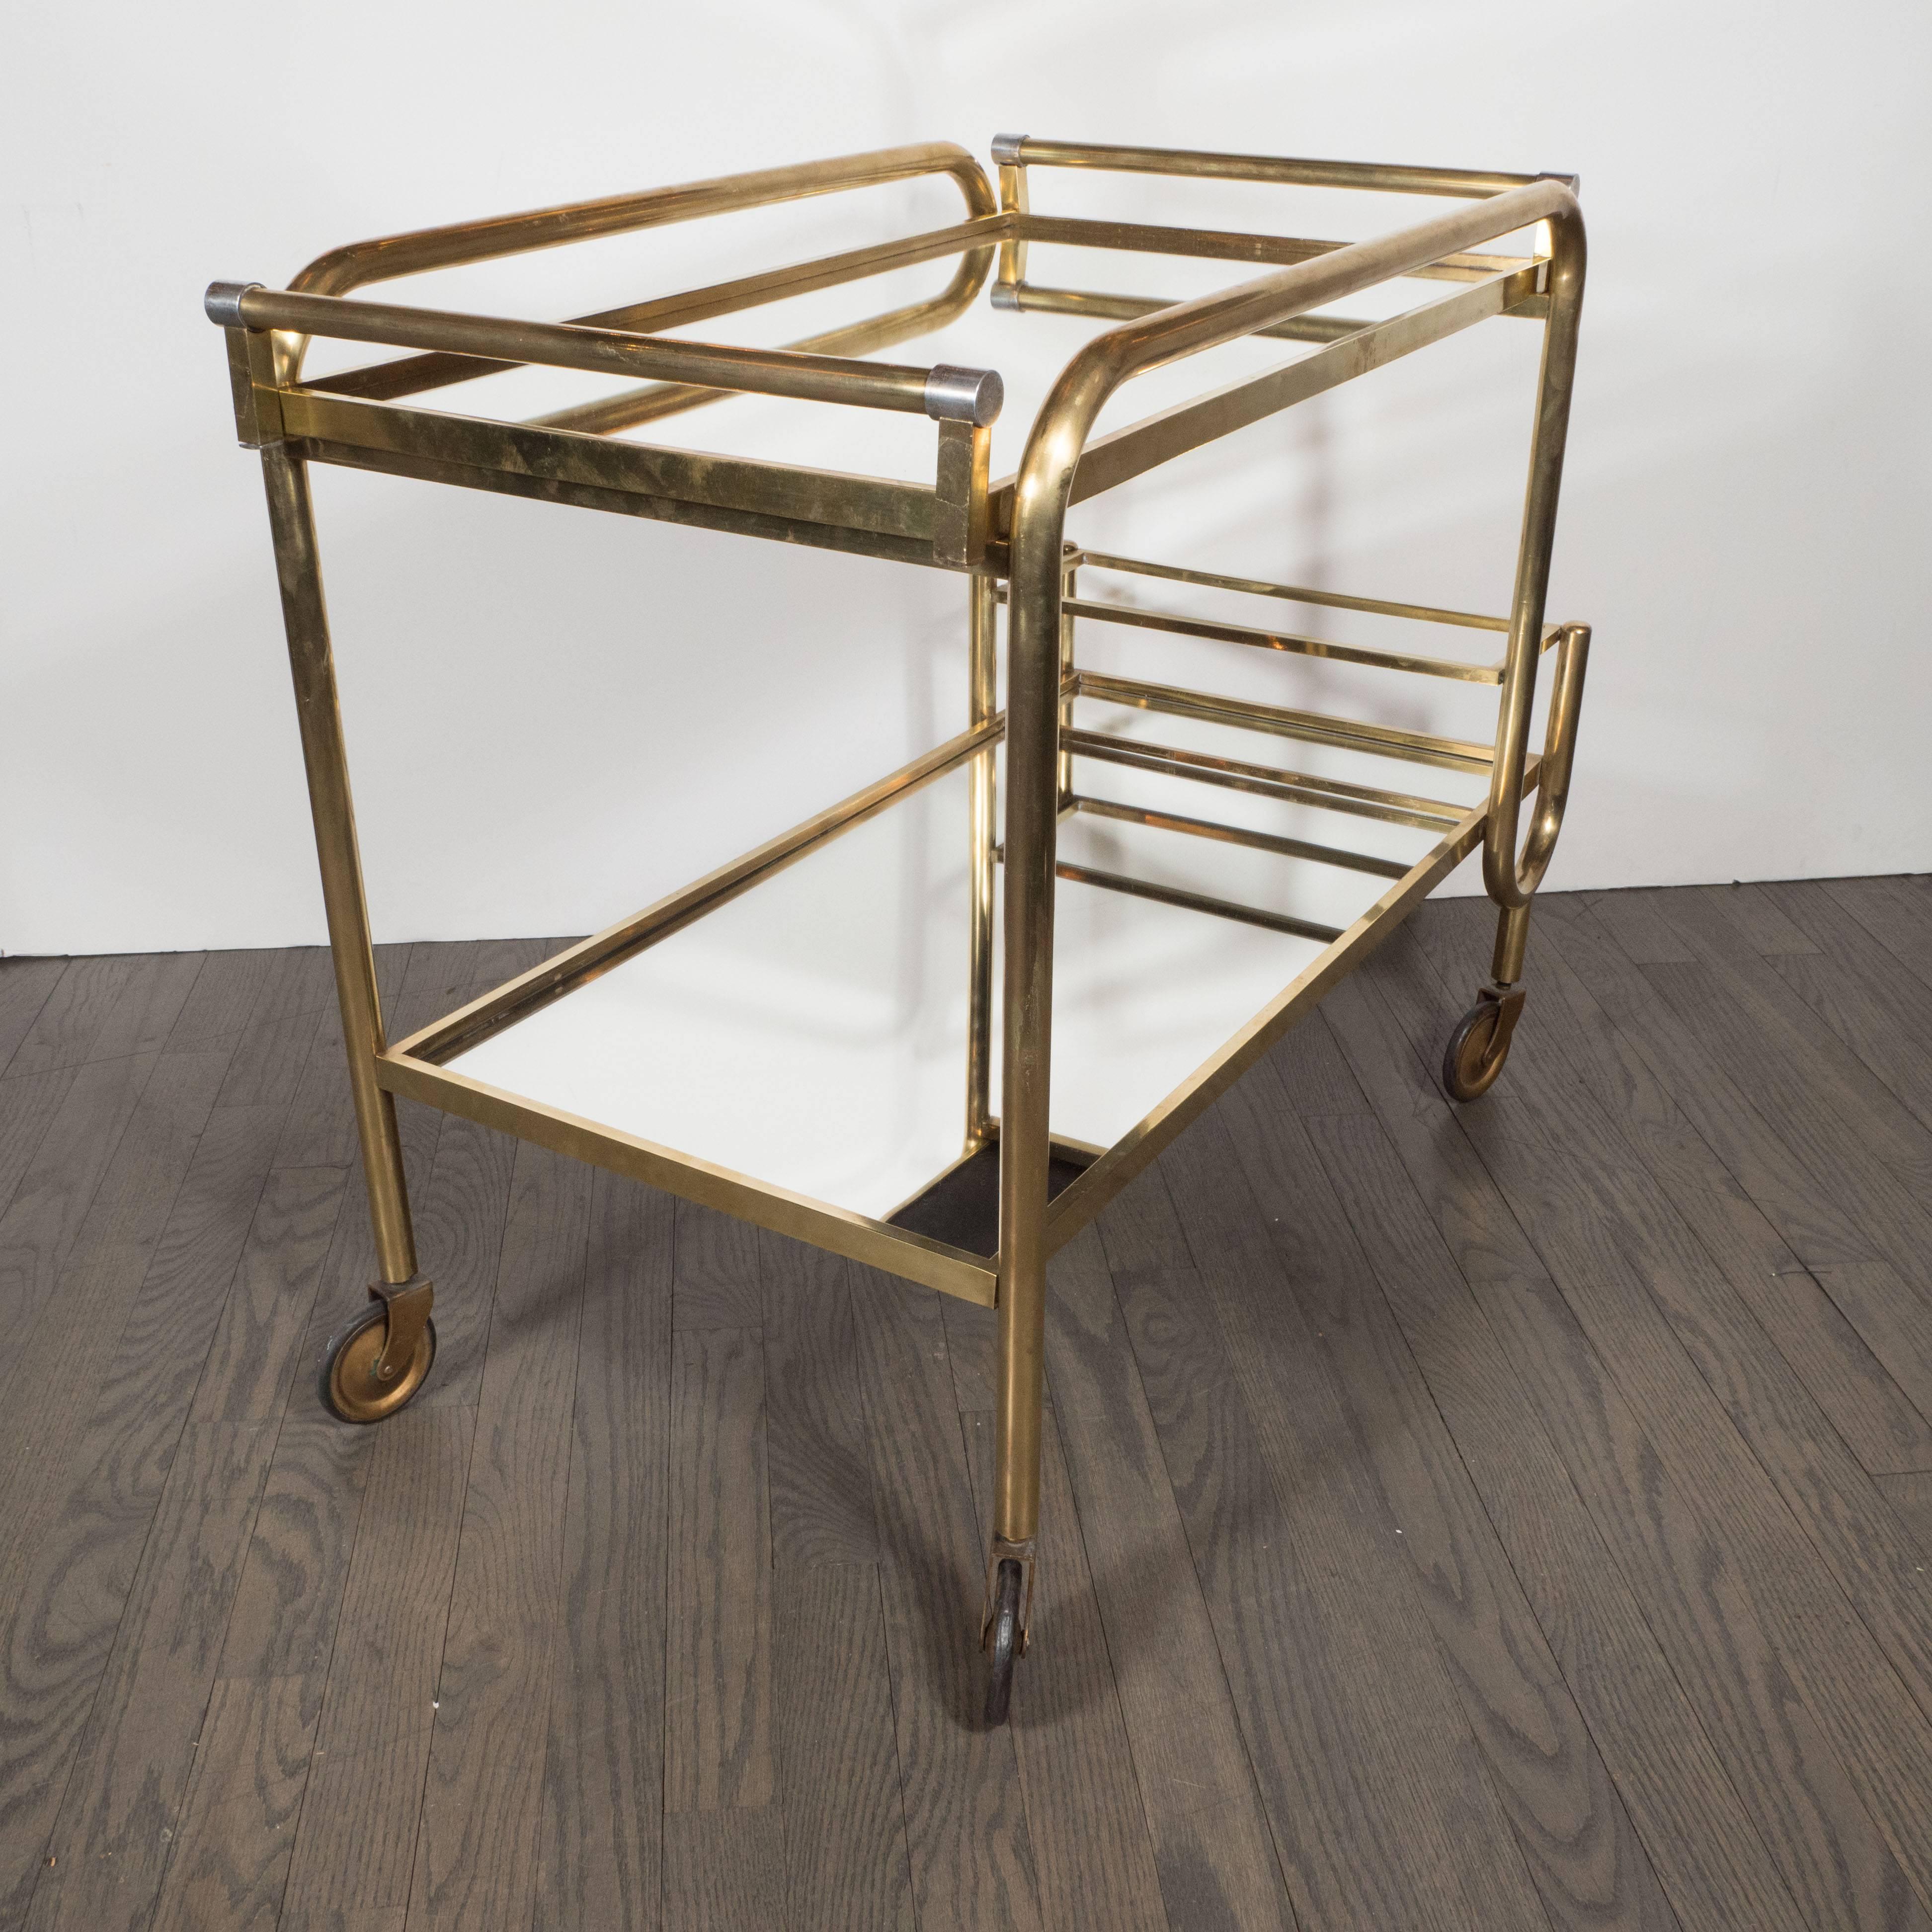 This stunning Mid-Century Modern brass and mirrored glass bar cart was realized in Italy, circa 1950. It features two tiers of mirrored glass- a tray on top, and a shelf on bottom- connected with an undulating tubular frame in brushed brass. At the